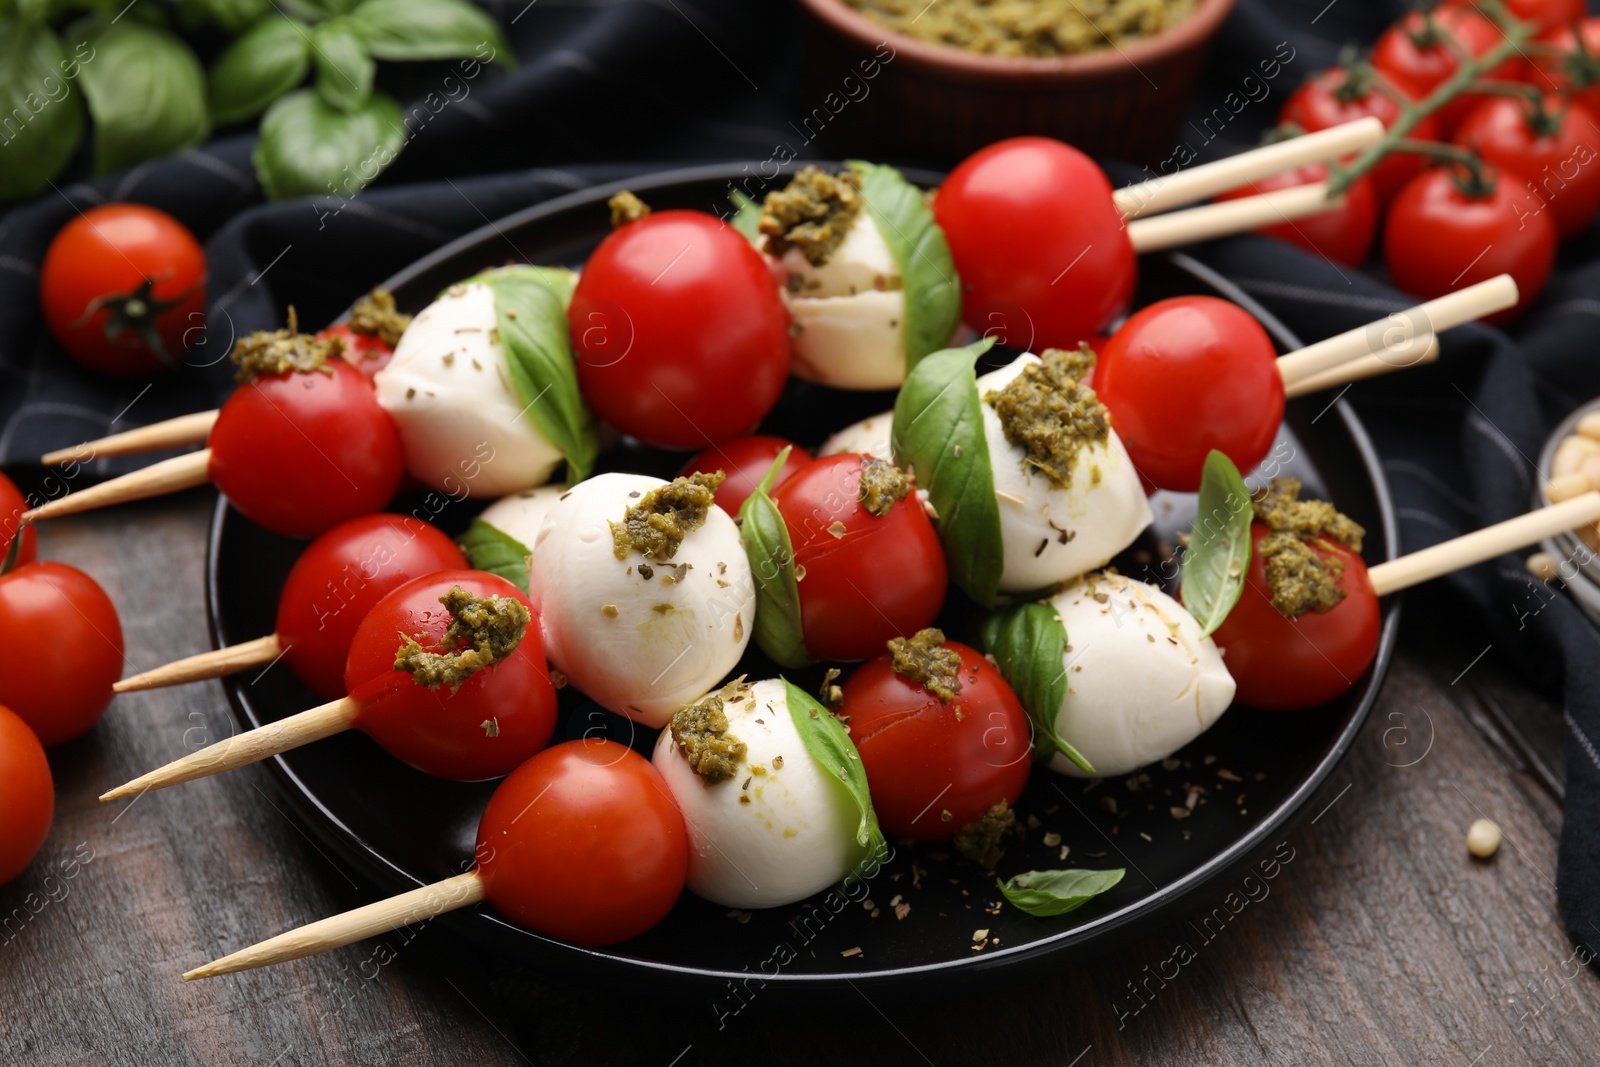 Photo of Caprese skewers with tomatoes, mozzarella balls, basil and pesto sauce on wooden table, closeup